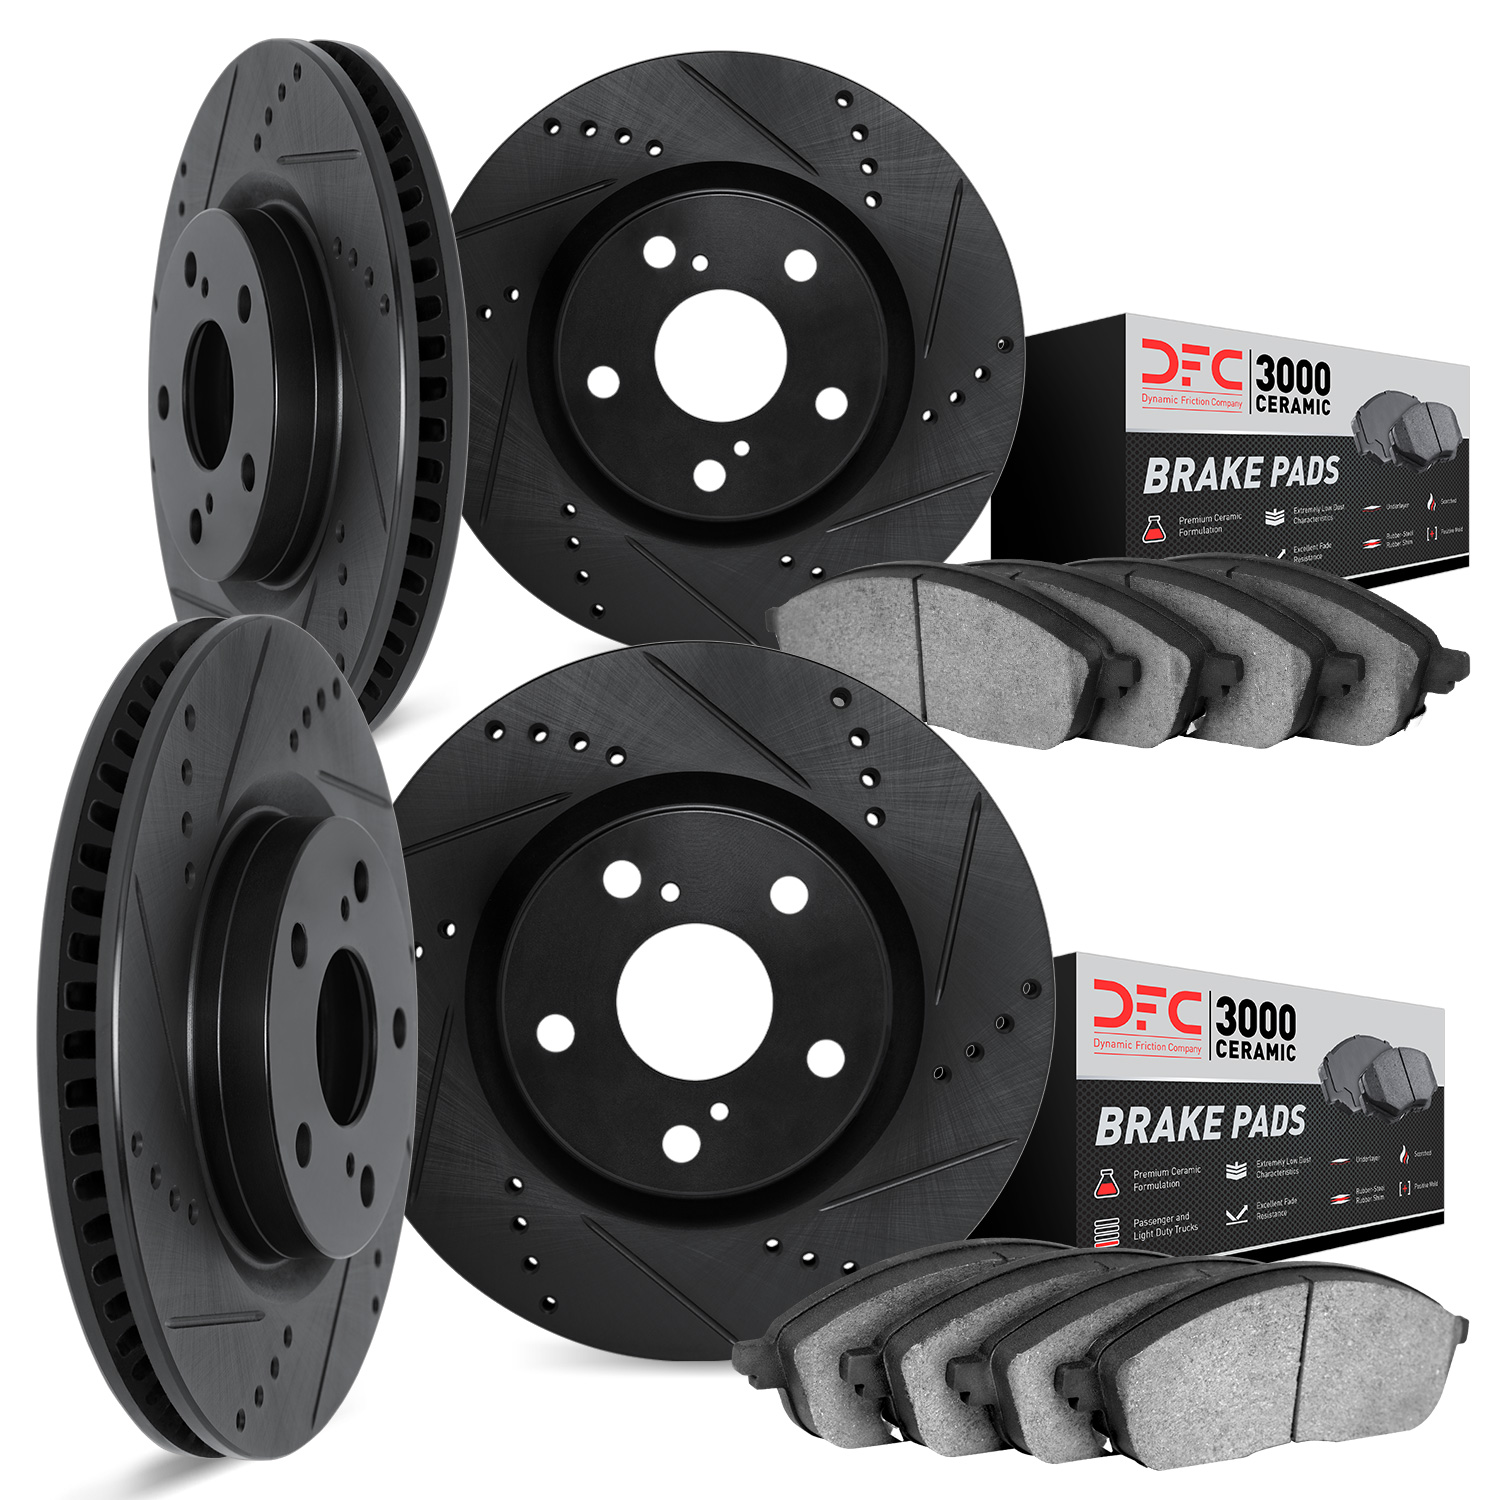 8304-67073 Drilled/Slotted Brake Rotors with 3000-Series Ceramic Brake Pads Kit [Black], Fits Select Infiniti/Nissan, Position: